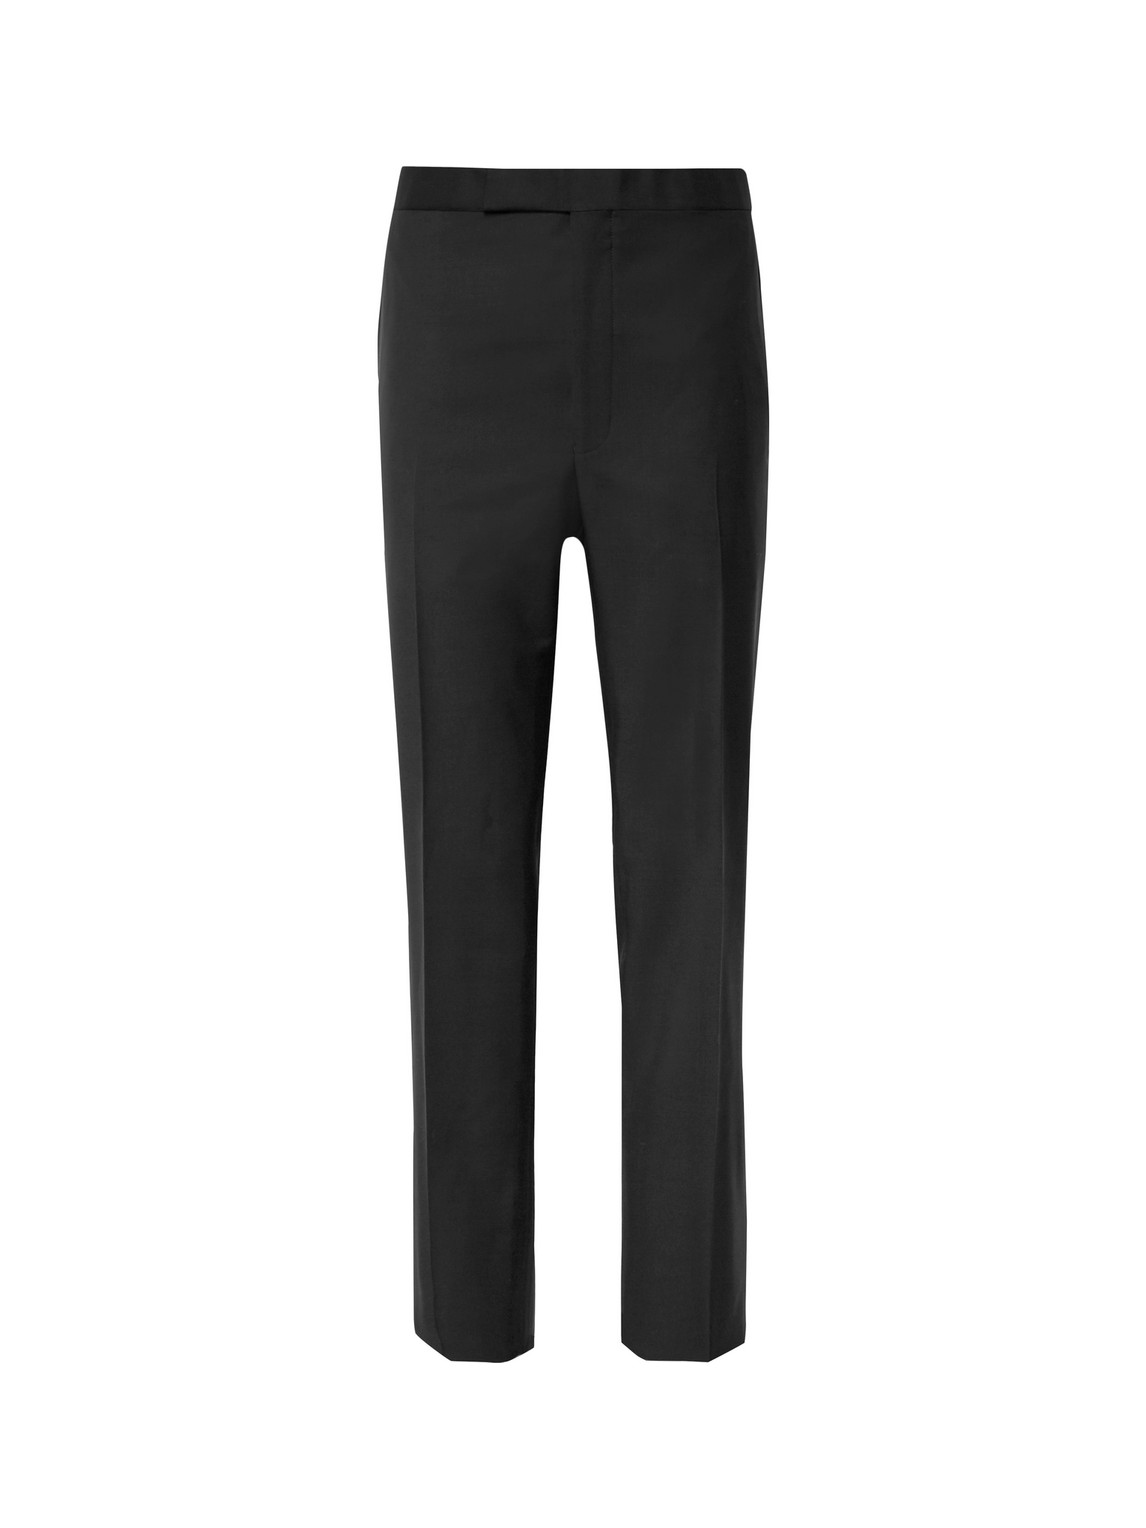 Richard James Black Satin-trimmed Wool And Mohair-blend Tuxedo Trousers